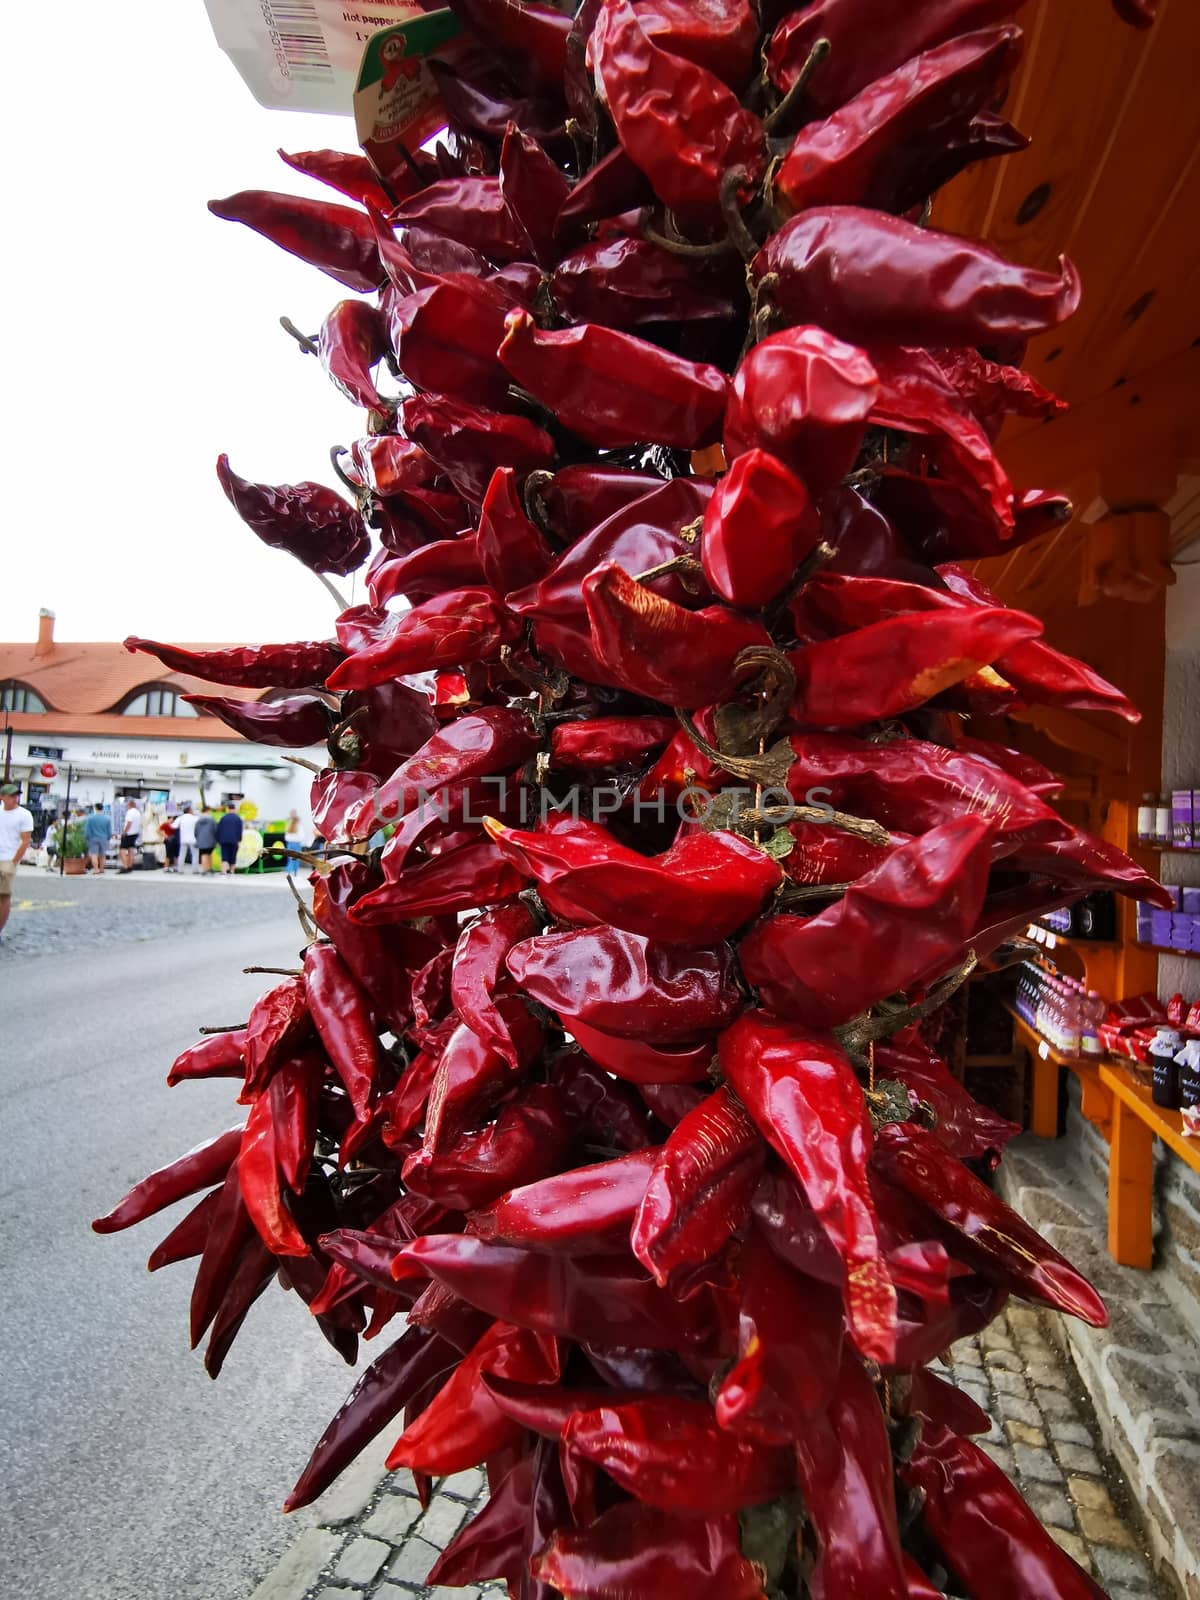 Strong chili peppers at Tihany by balage941